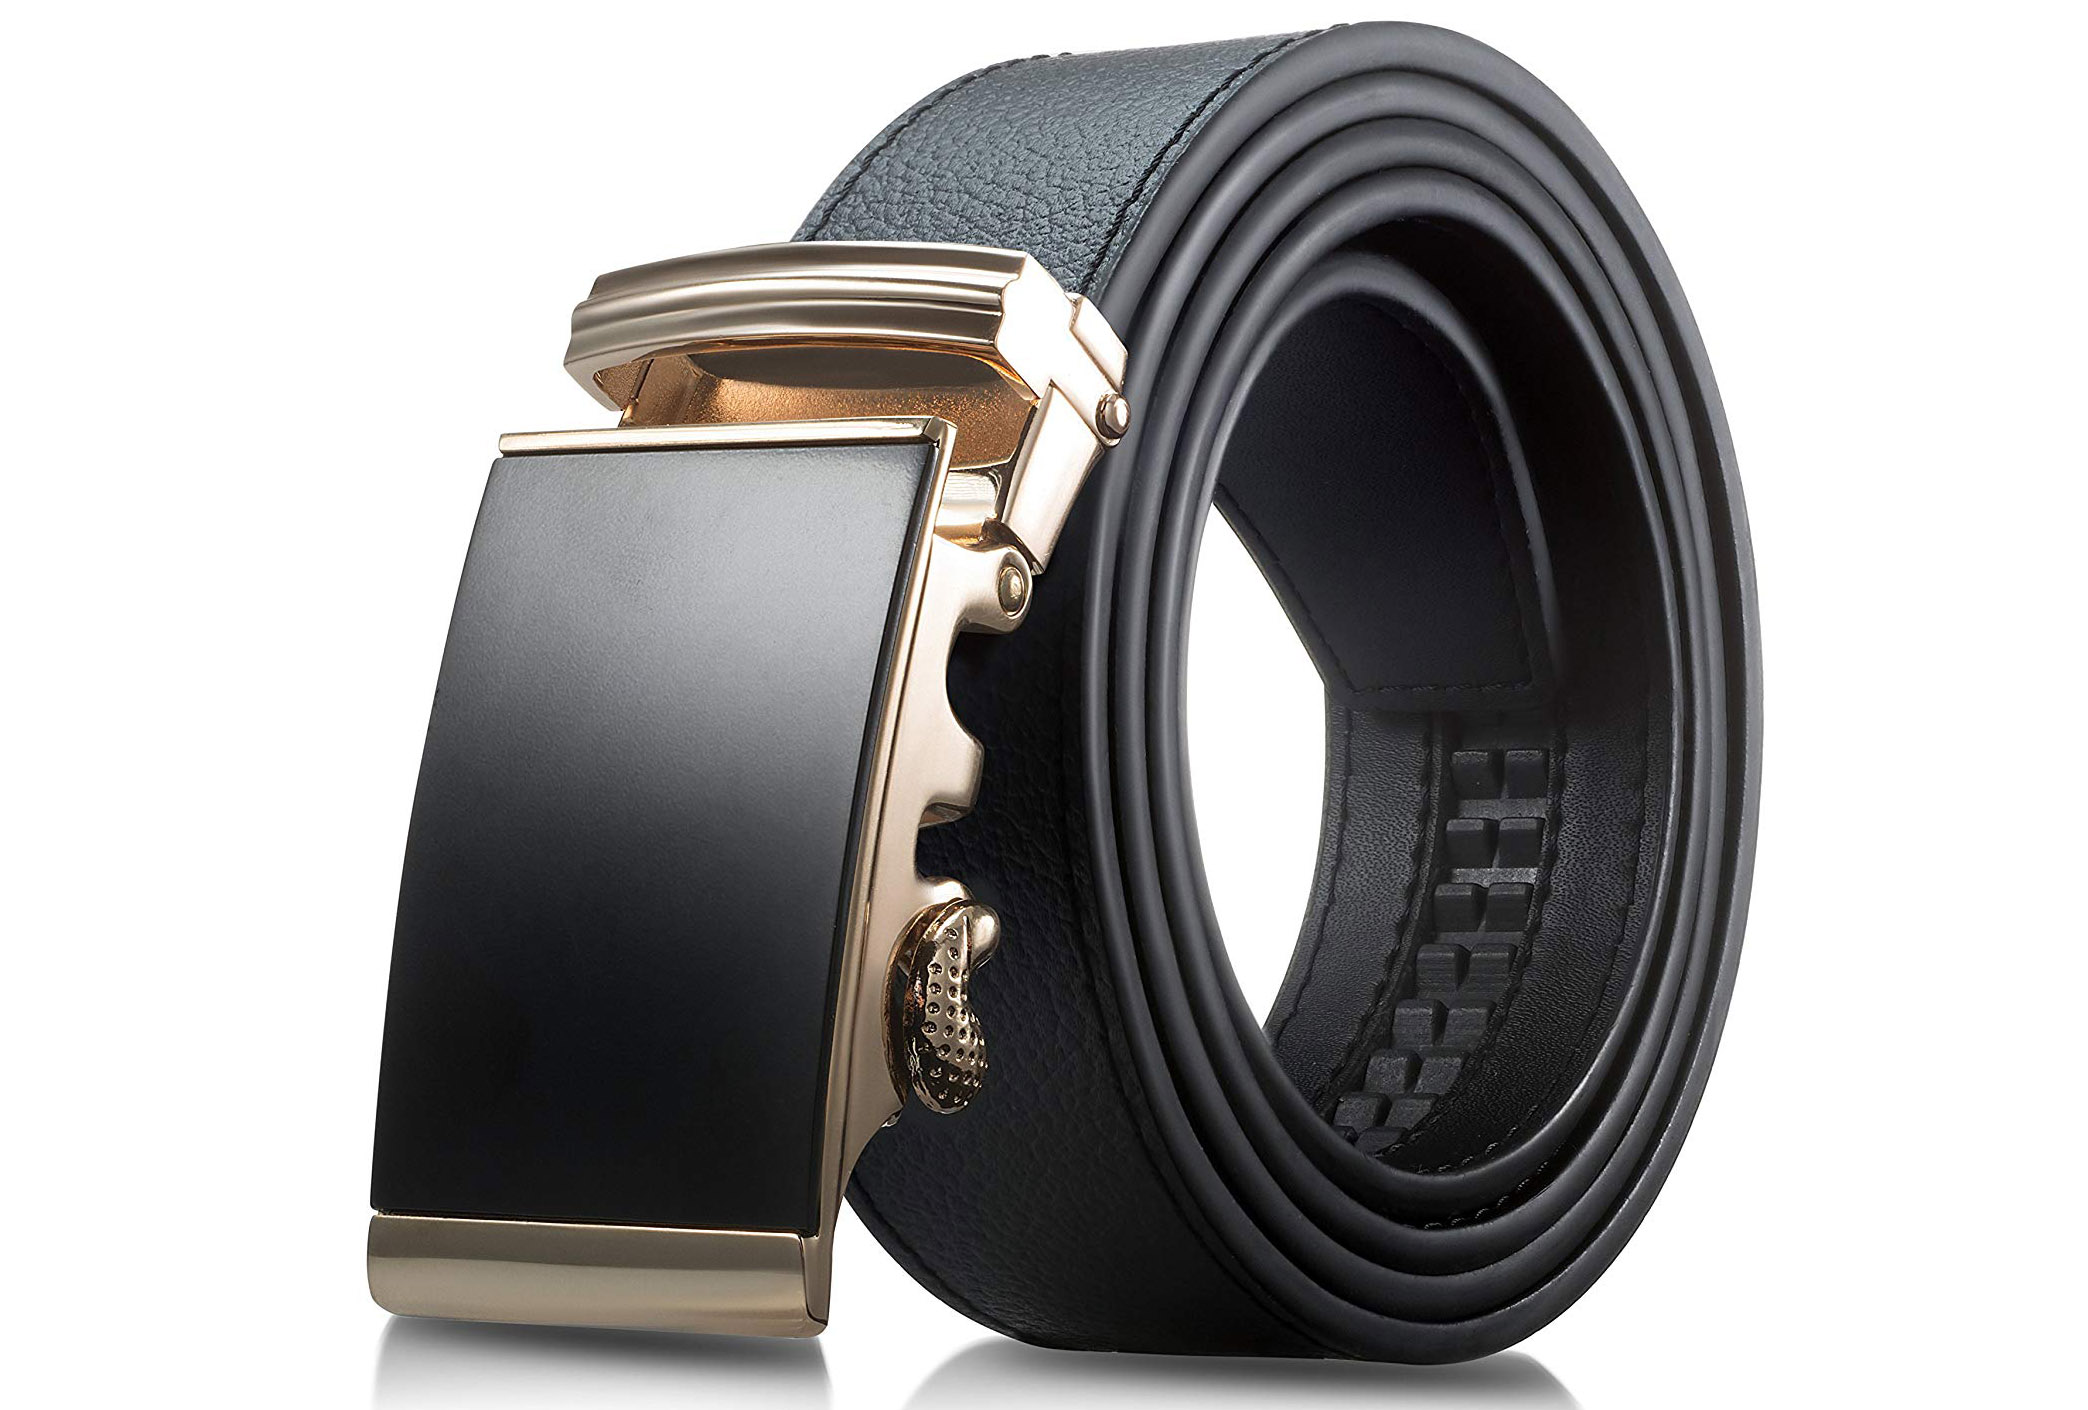 19 Super Stylish Belts To Bring Your Look Together And Make It Pop ...